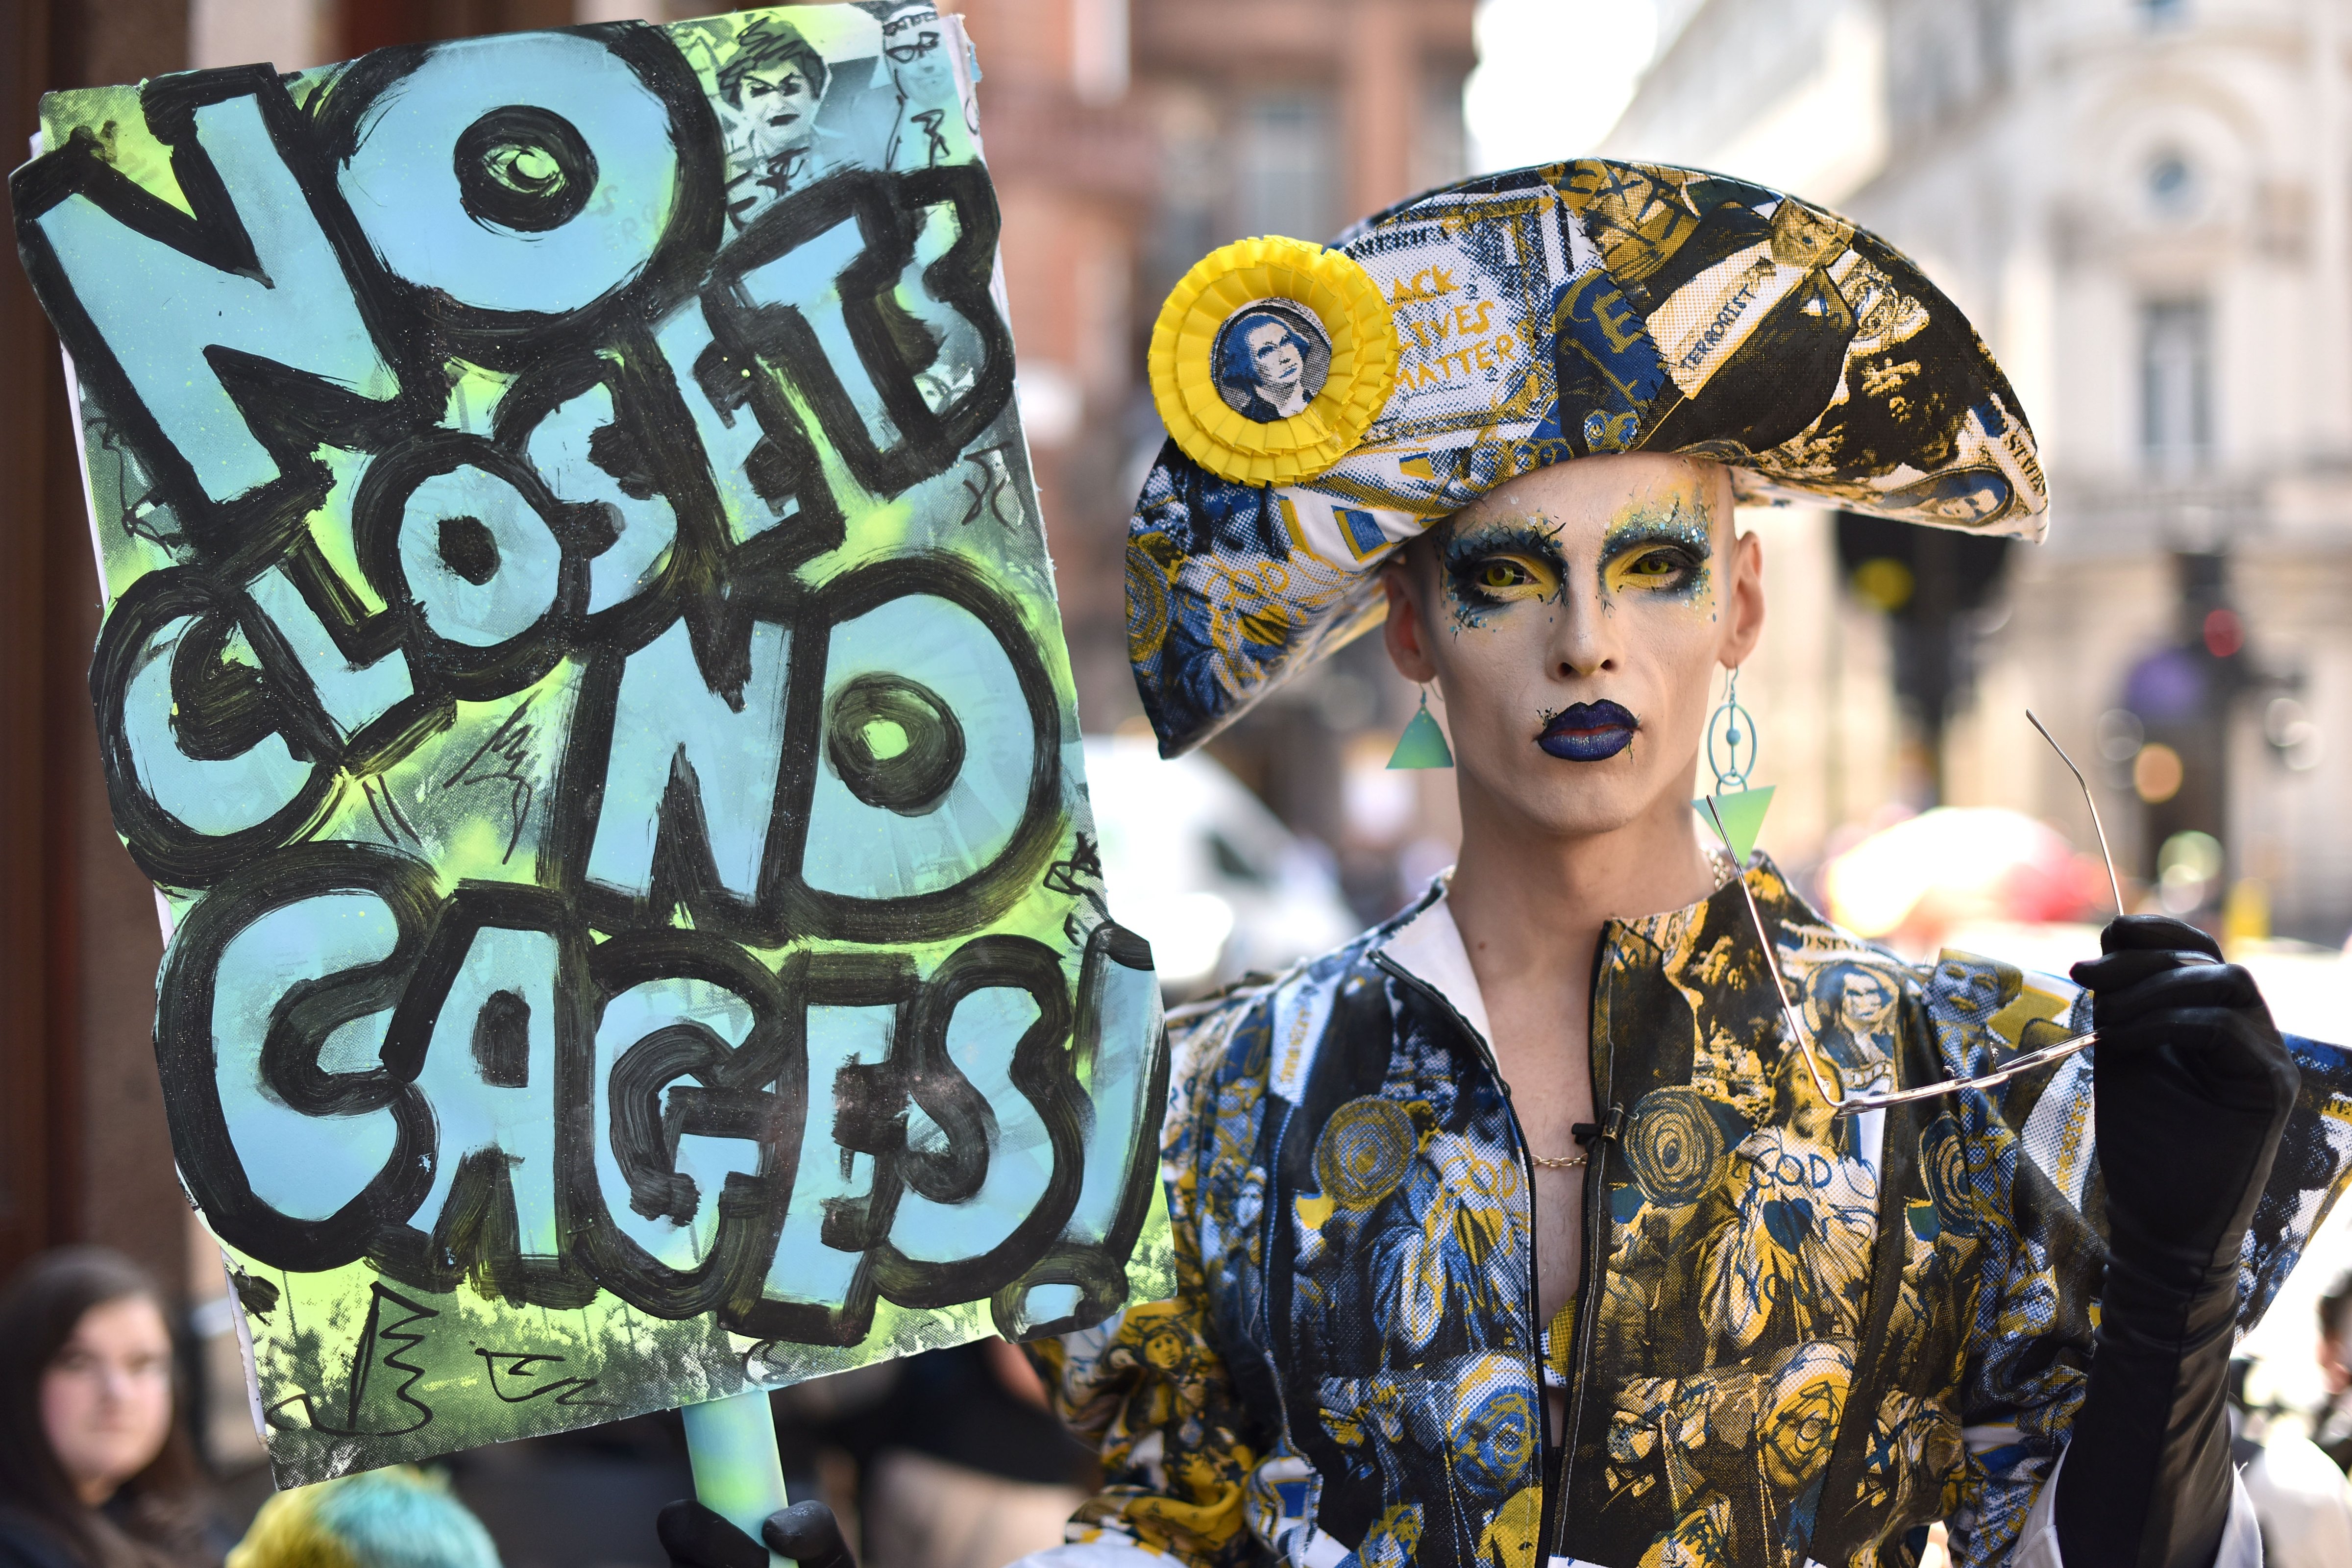 Drag Queen Cheddar Gorgeous attends the Drag Protest Parade LGBTQi+ March against Trump on July 13, 2018 in London, United Kingdom. Drag queens hold a mass rally in Central London against the Trump administrations record on LGBT rights including a ban on transgender personnel. (John Keeble/Getty Images)